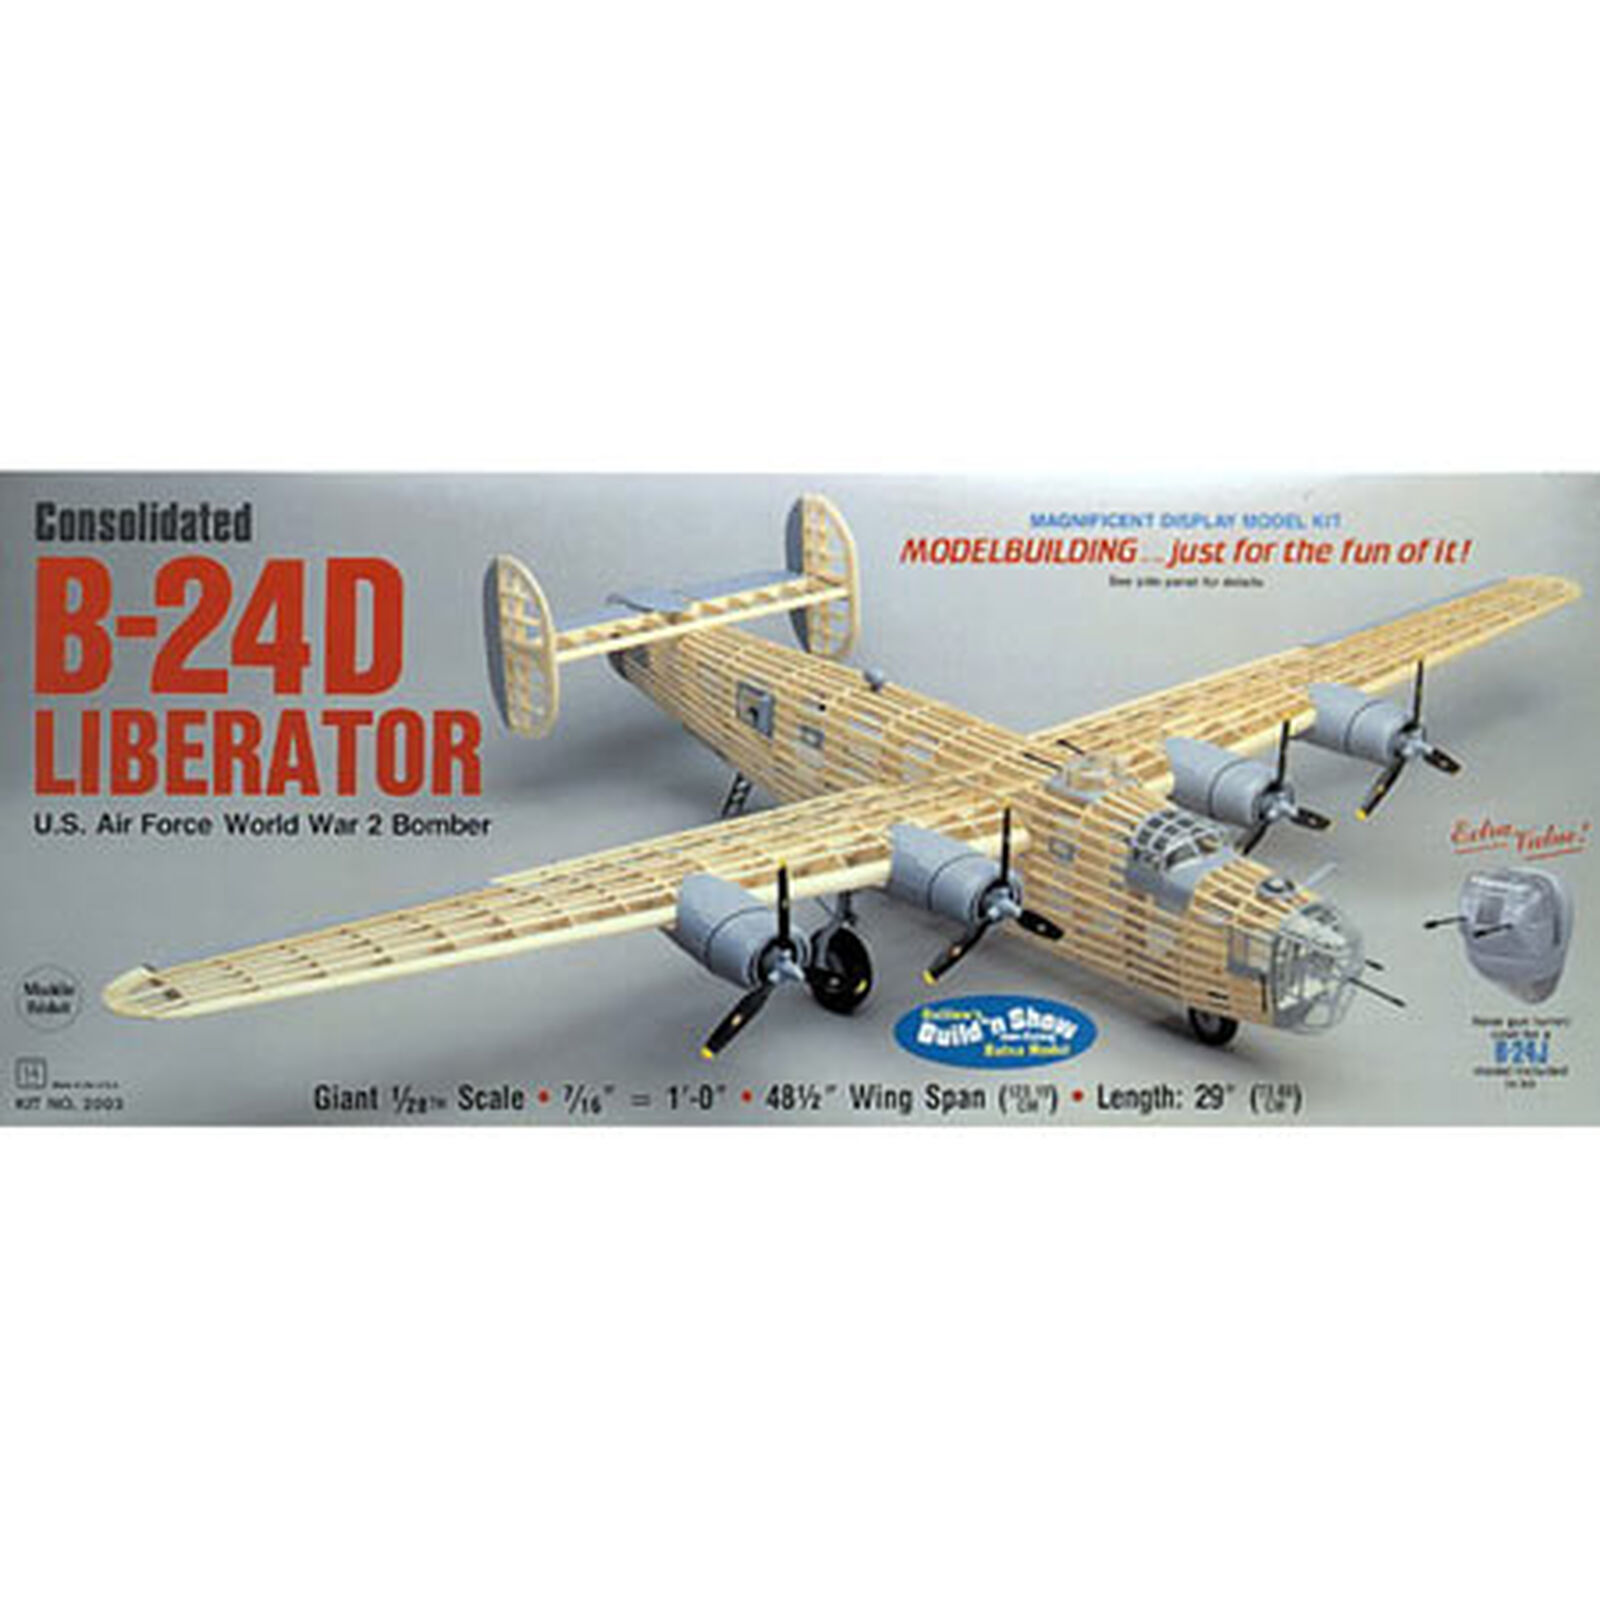 Consolidated B-24D Liberator, 48.5"